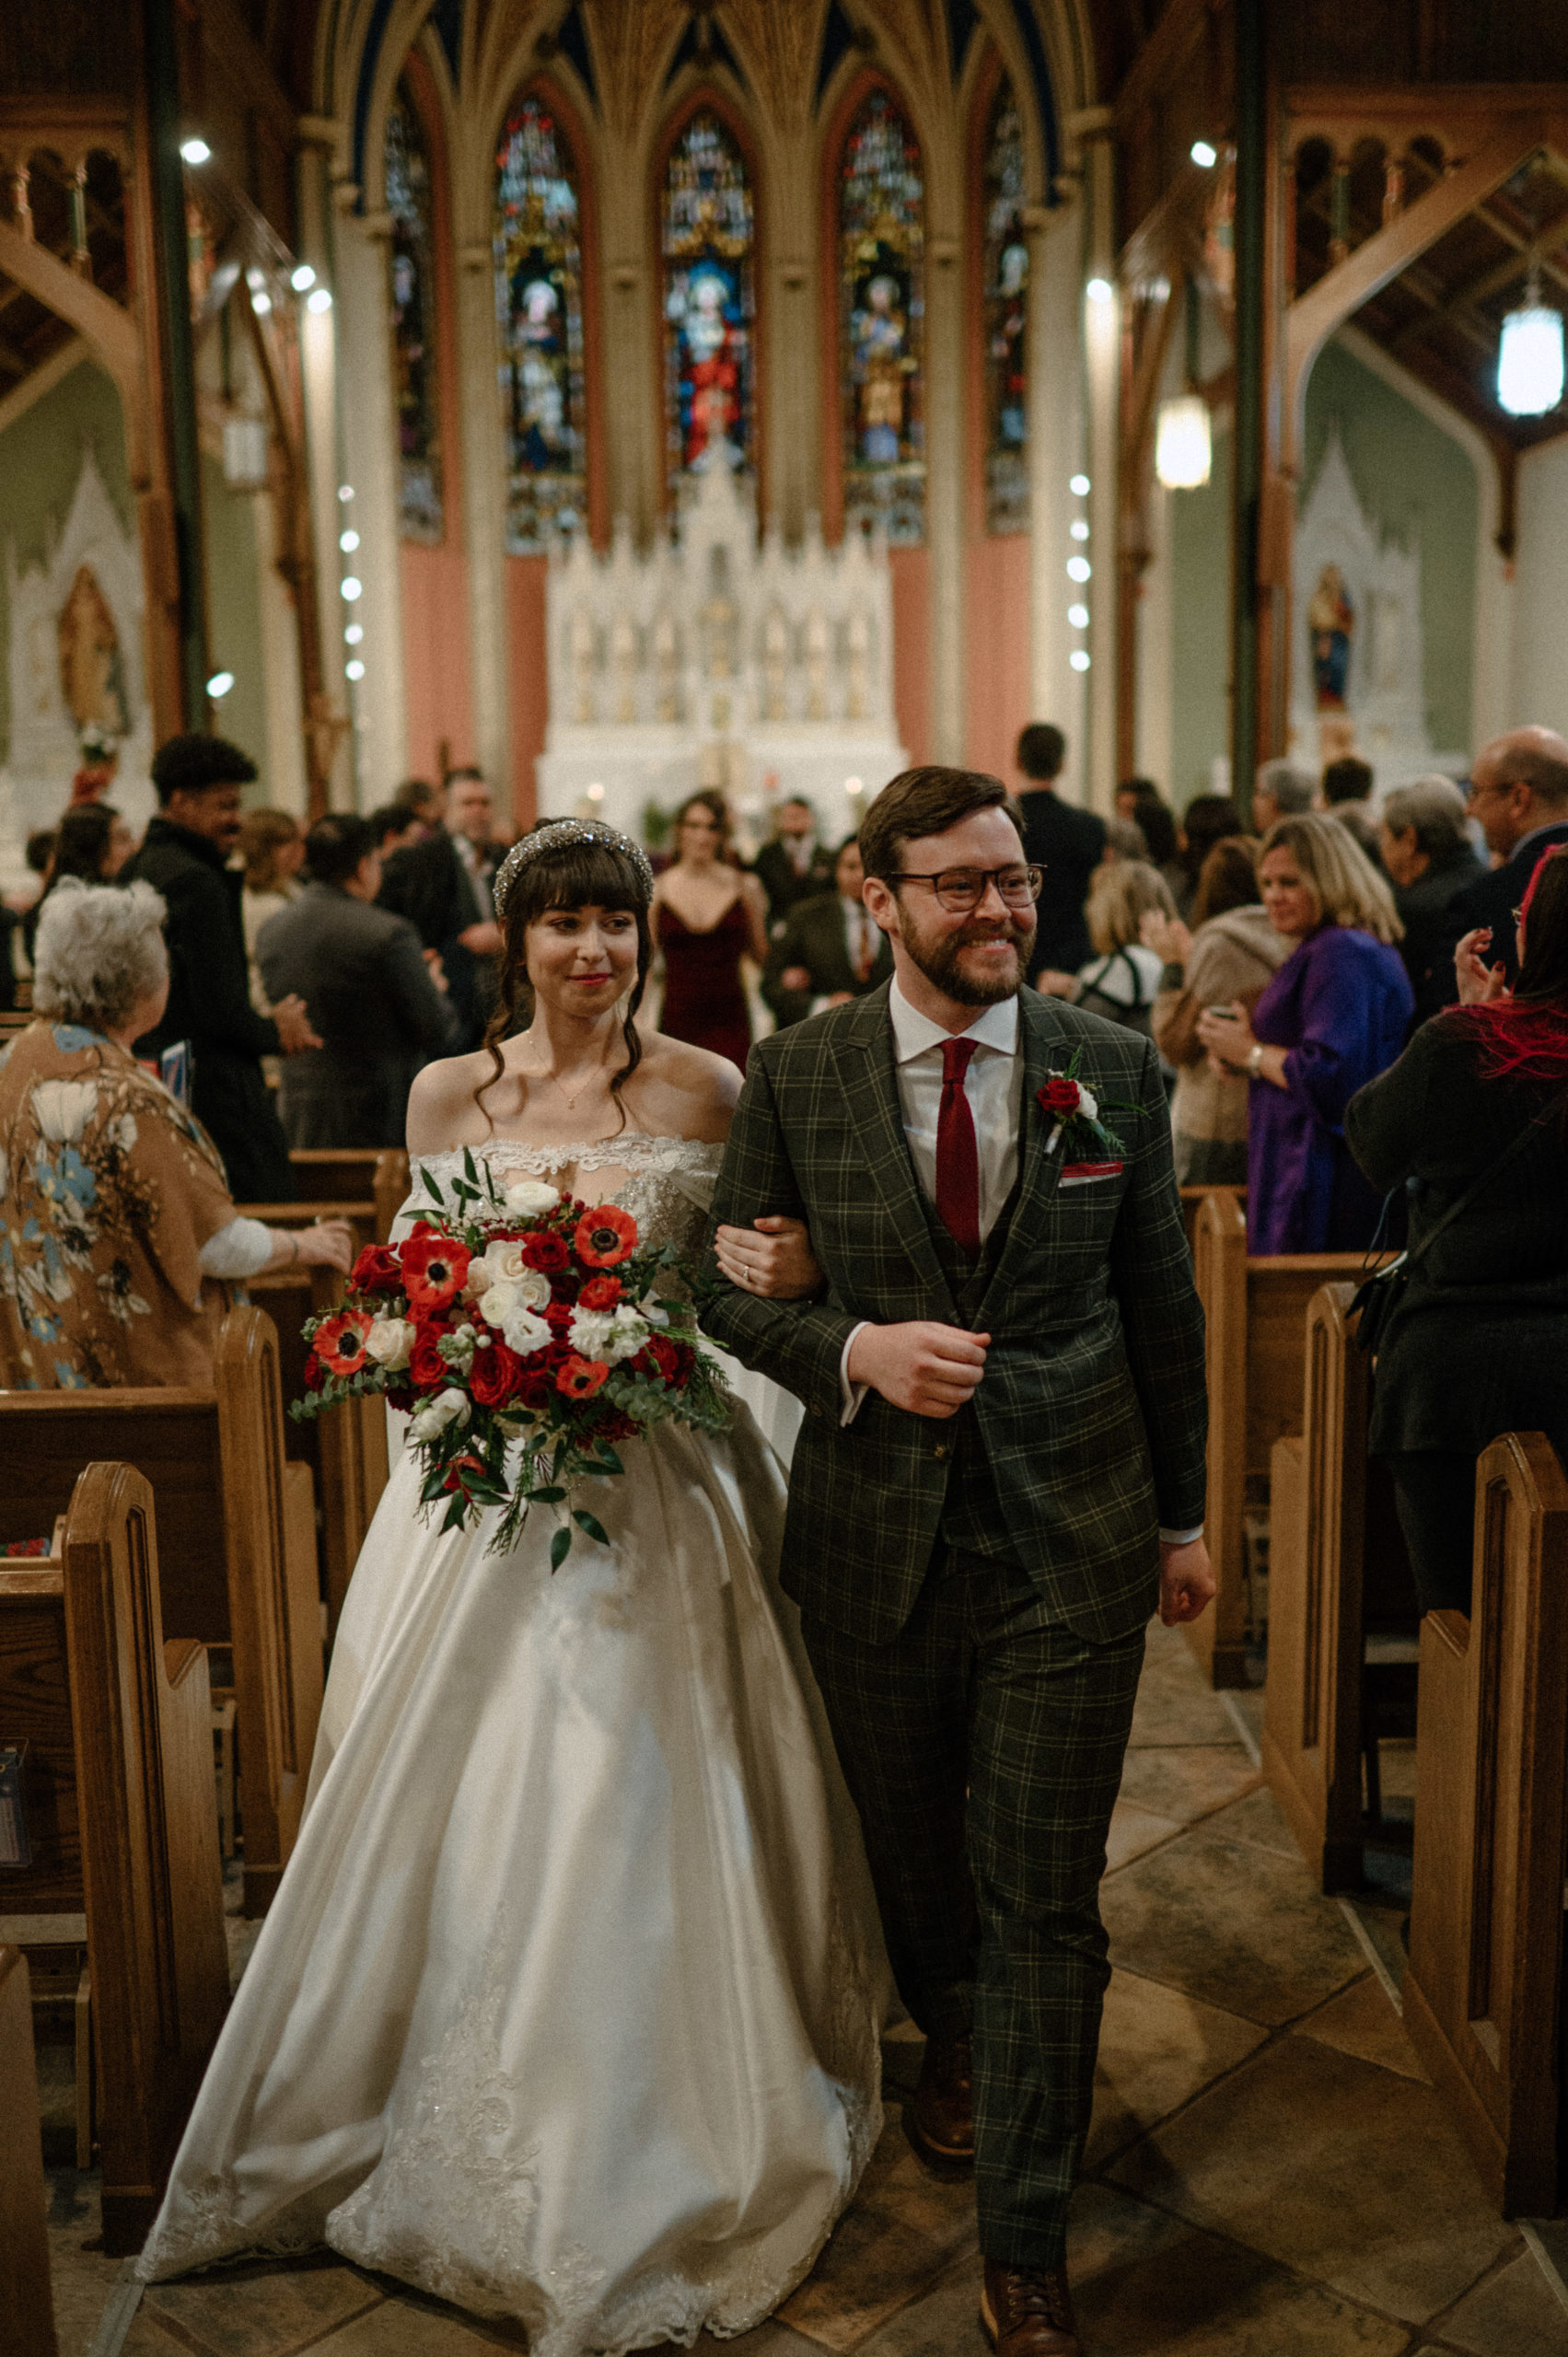 An intimate wedding at The Abbey in Peekskill New York.